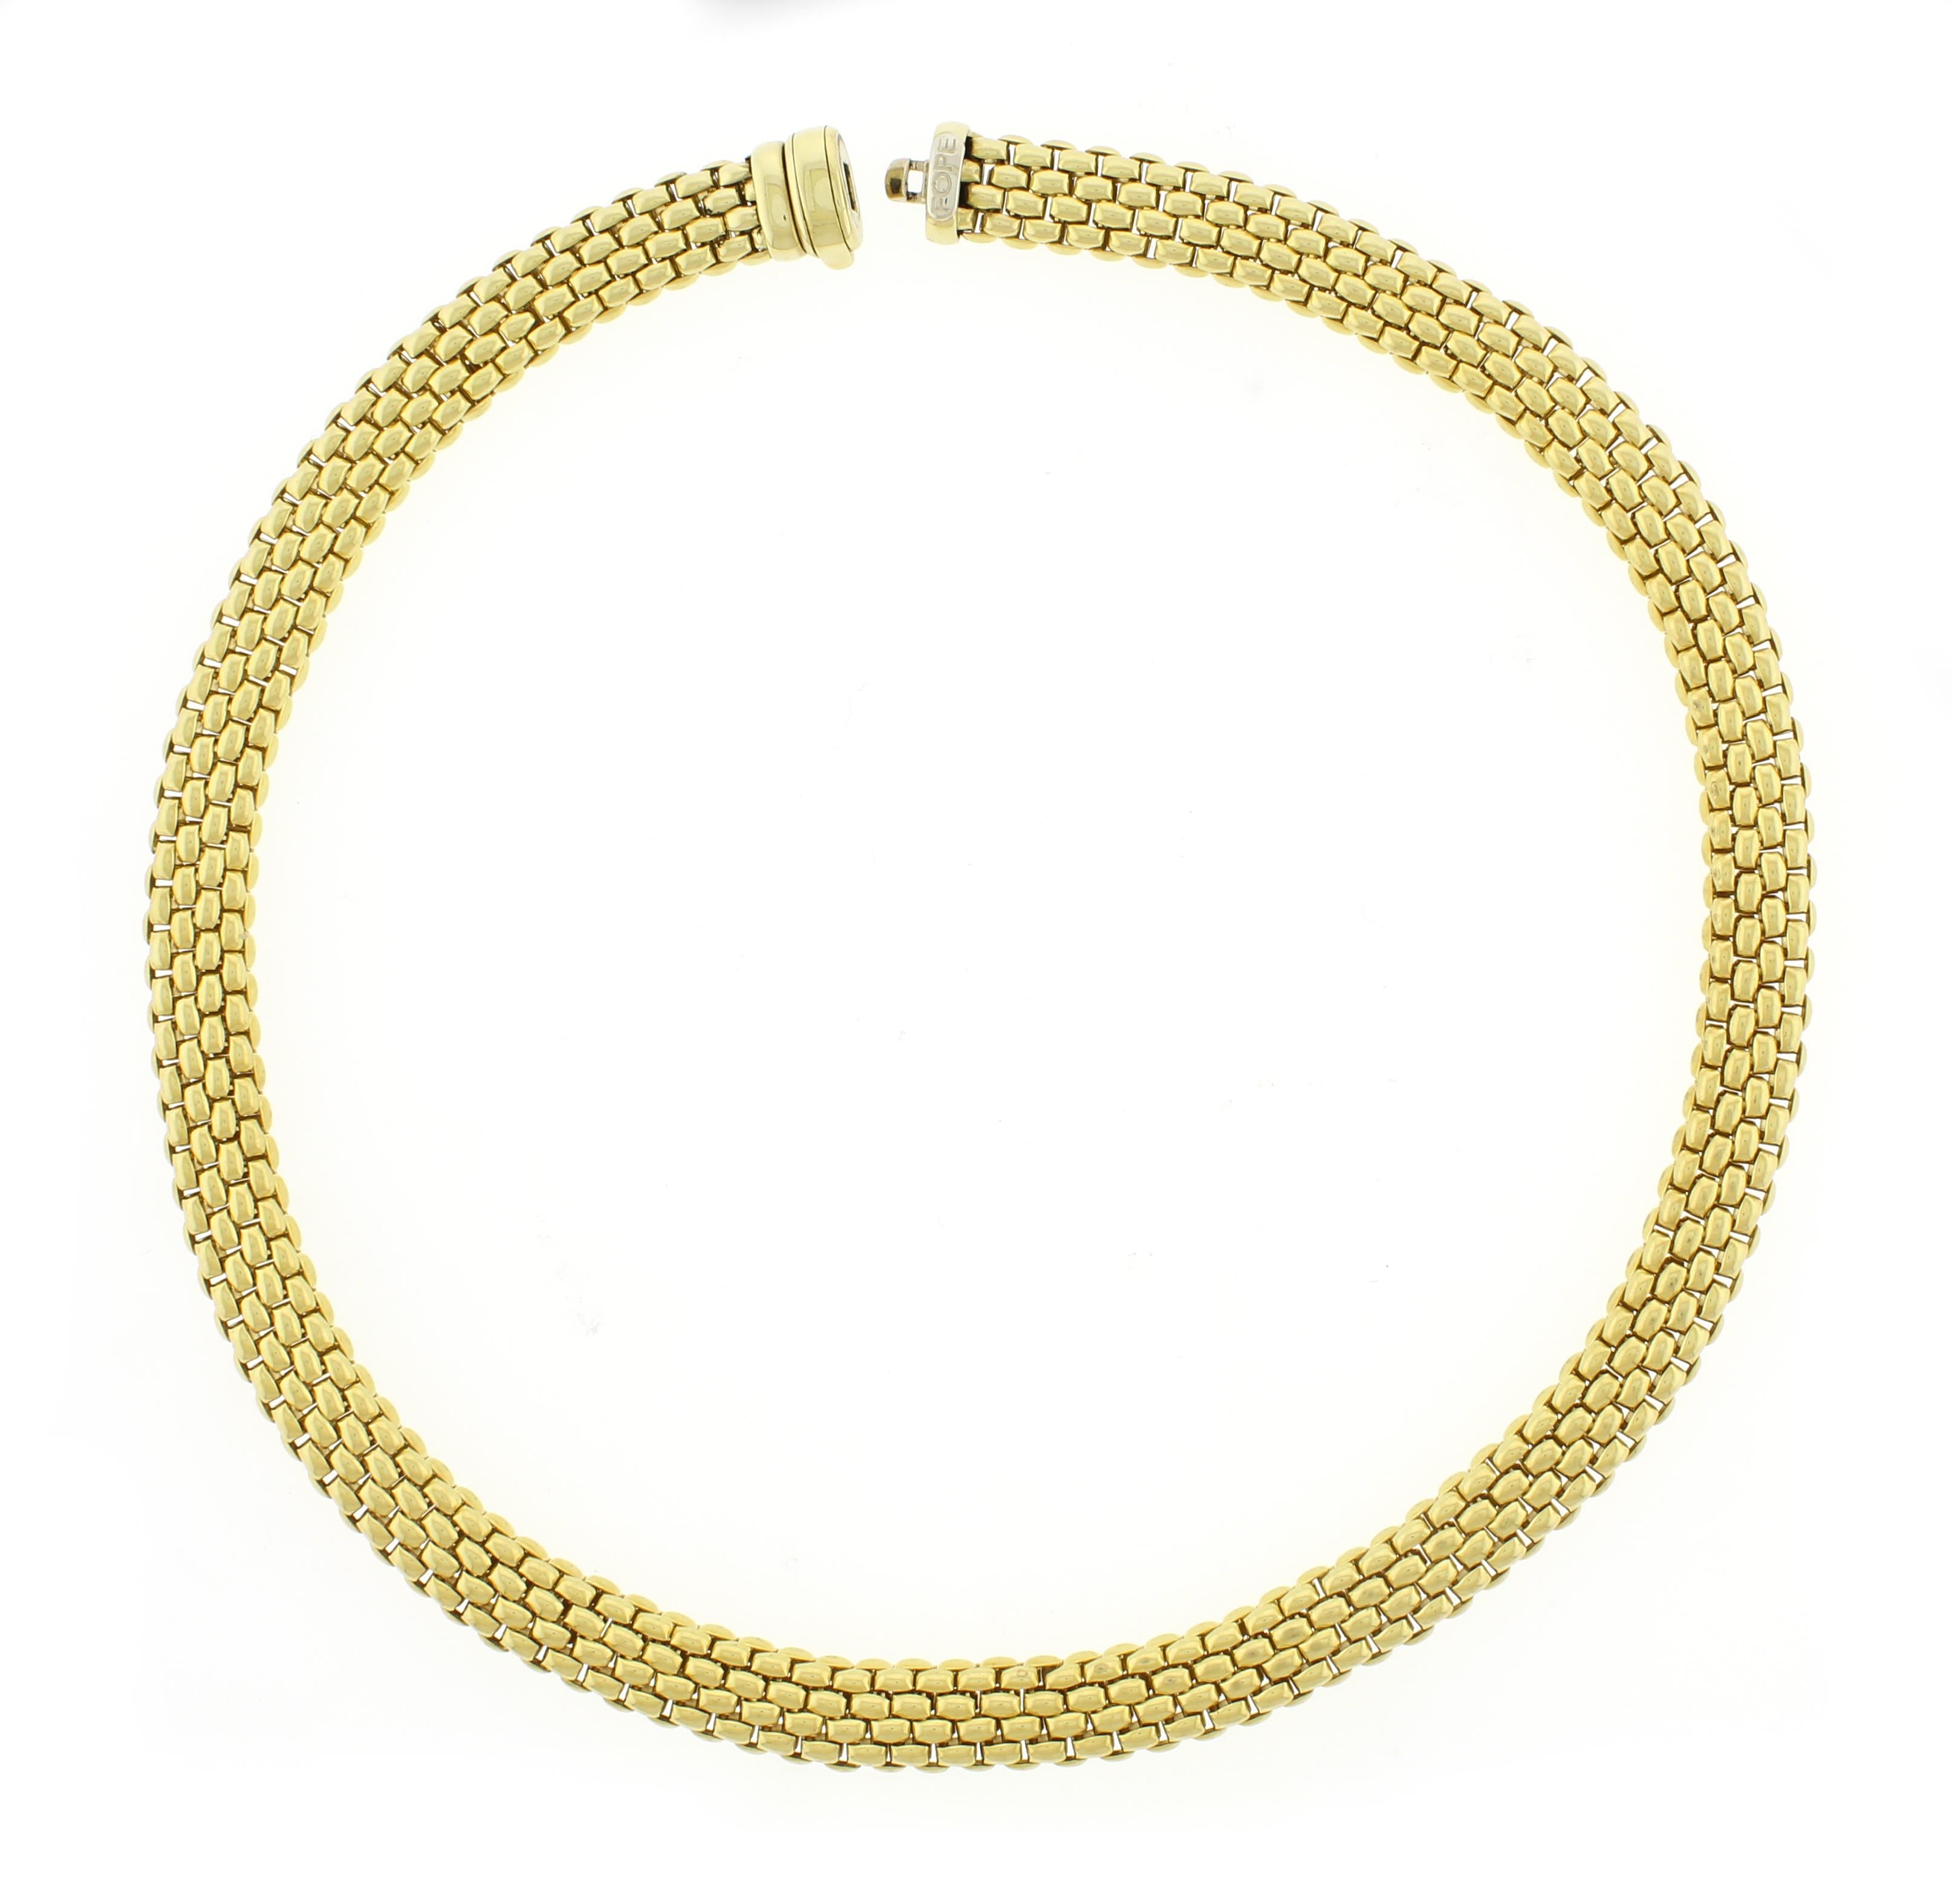 Italian 18kt Chain Link Necklace By Fope In Excellent Condition For Sale In Bethesda, MD